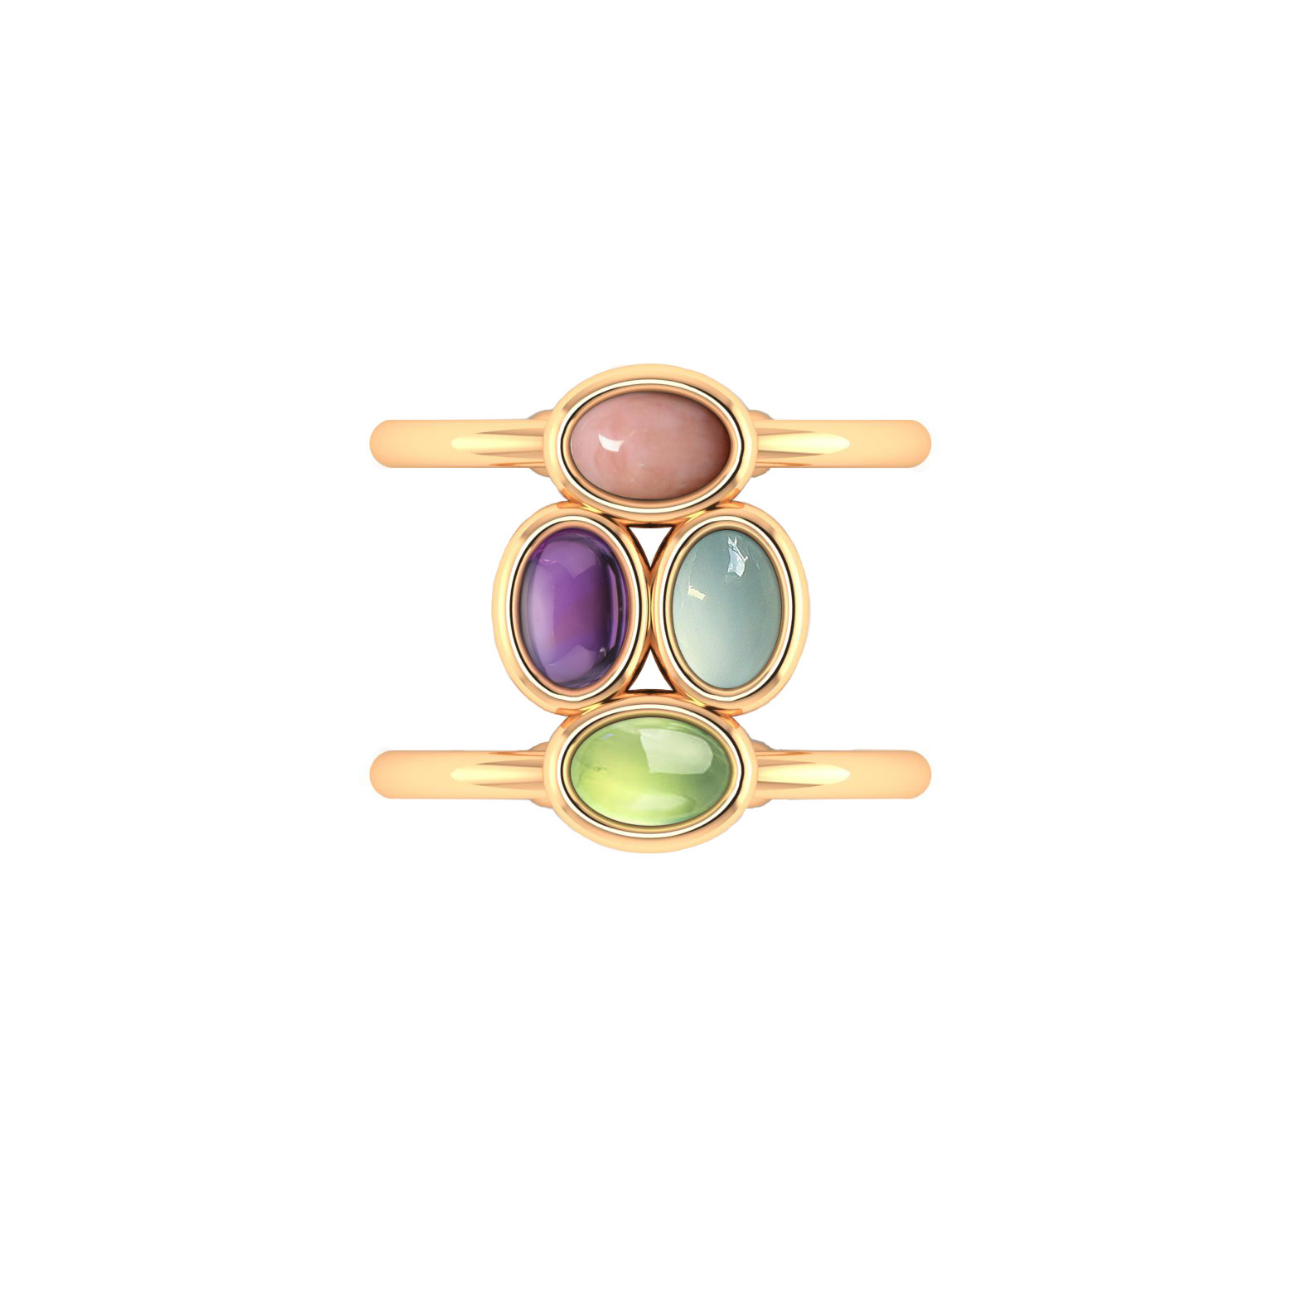 Bauble ring 18k gold